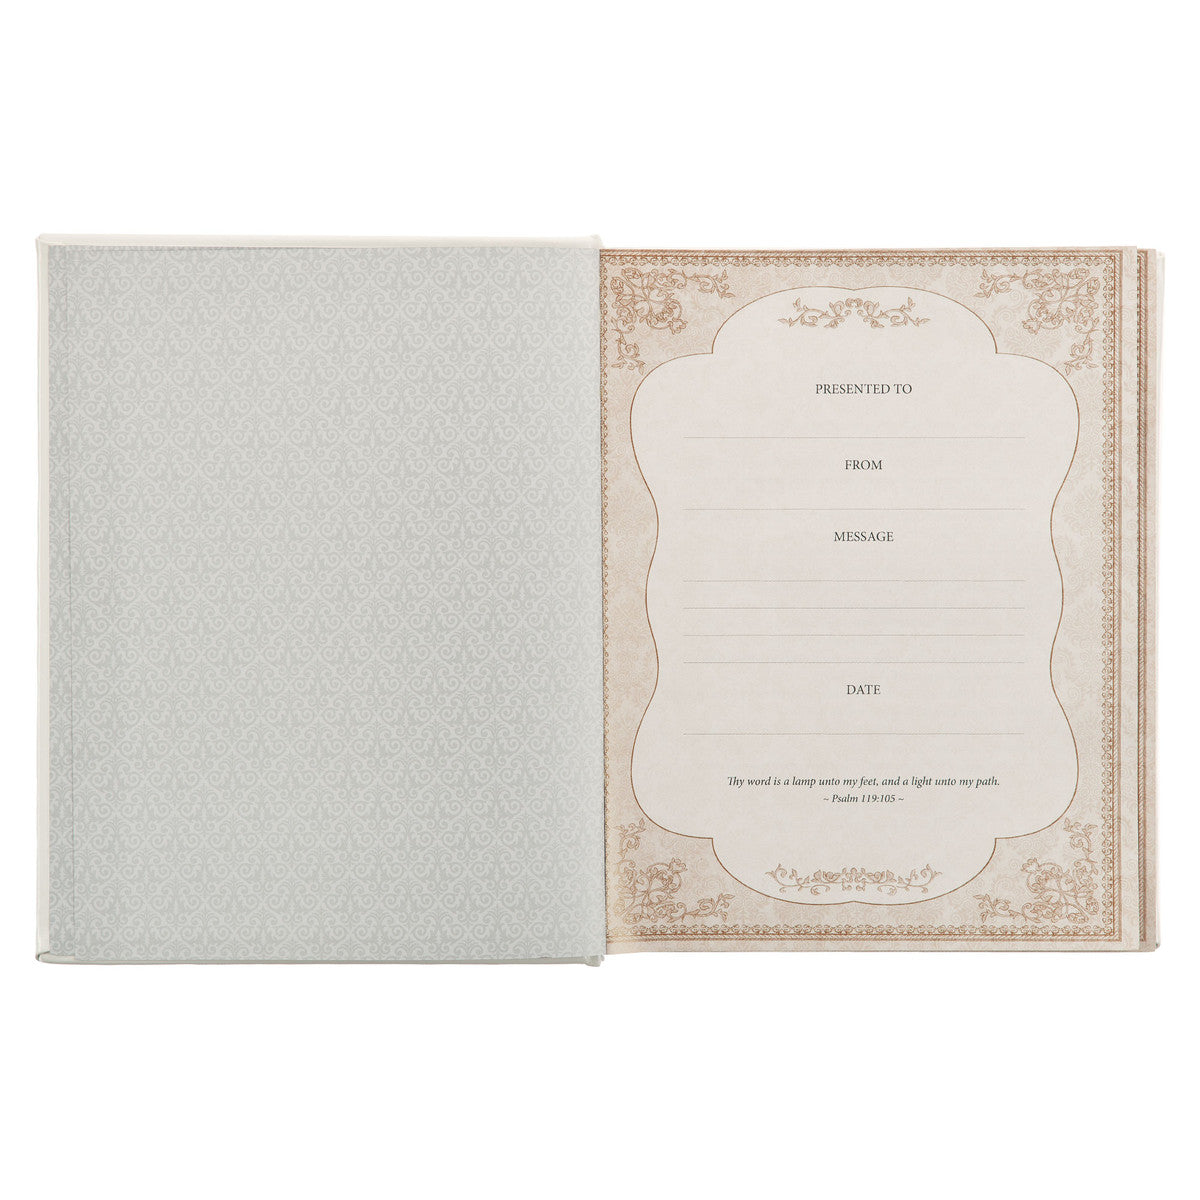 White Faux Leather King James Version Family Bible - The Christian Gift Company